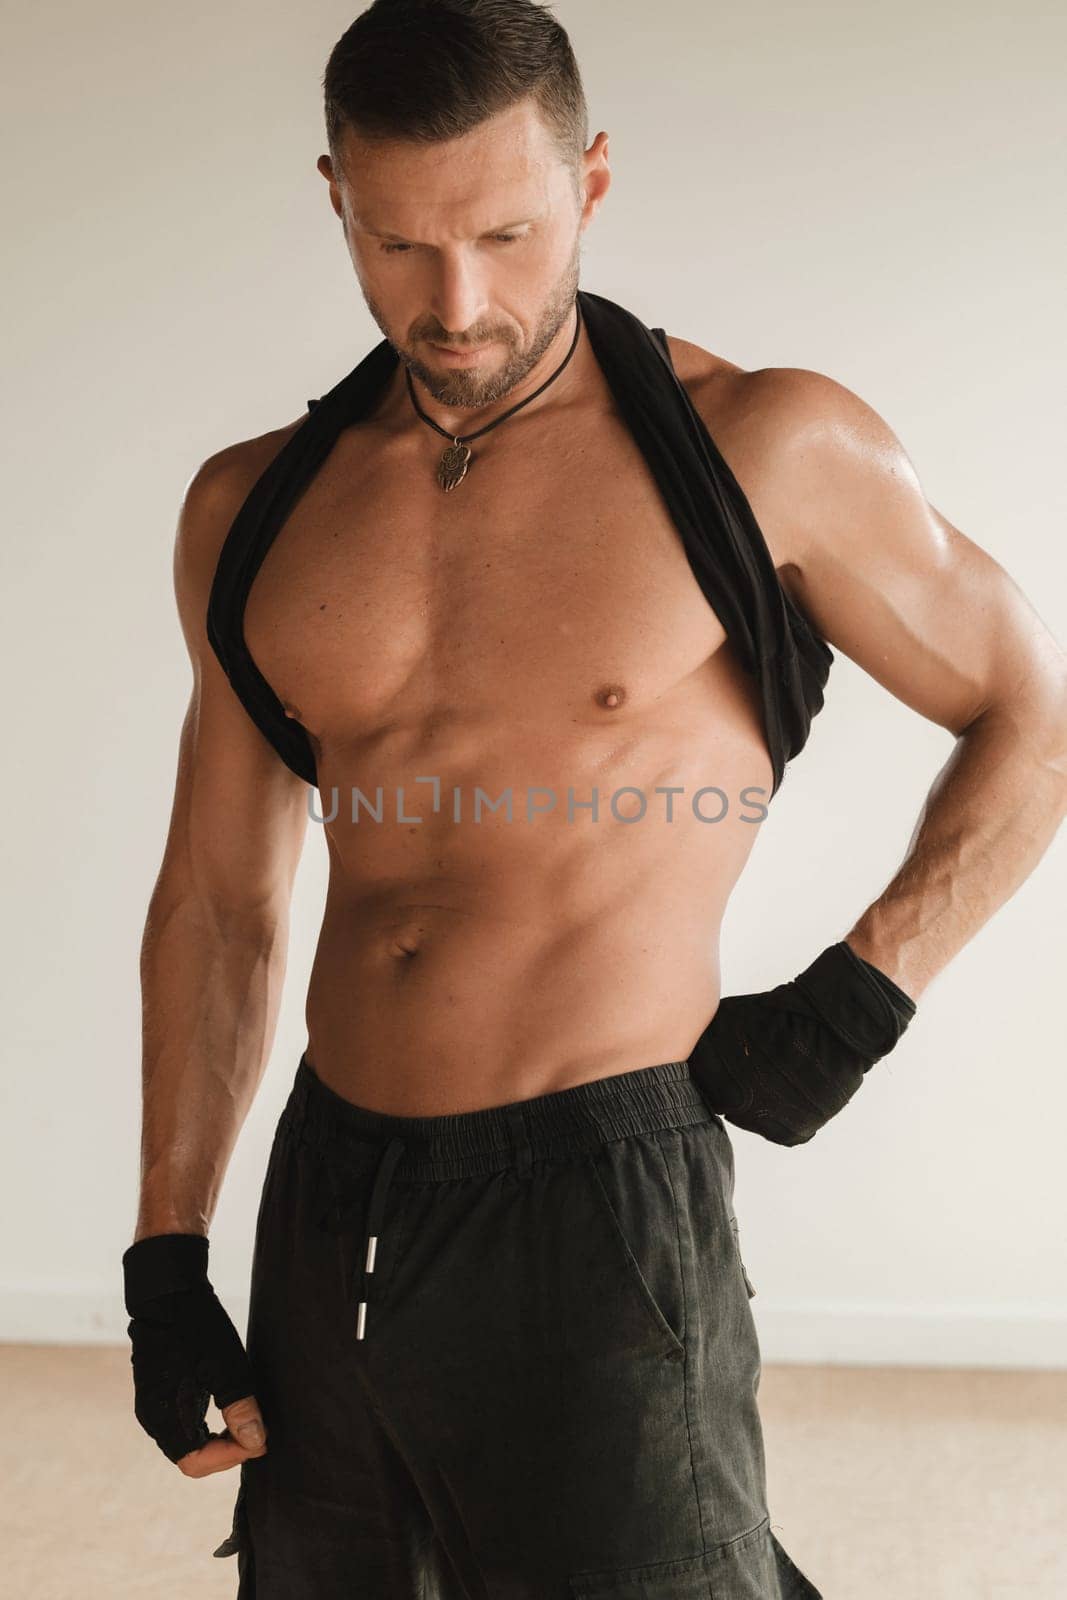 An adult muscular man with a naked torso stands in a room on a light background.